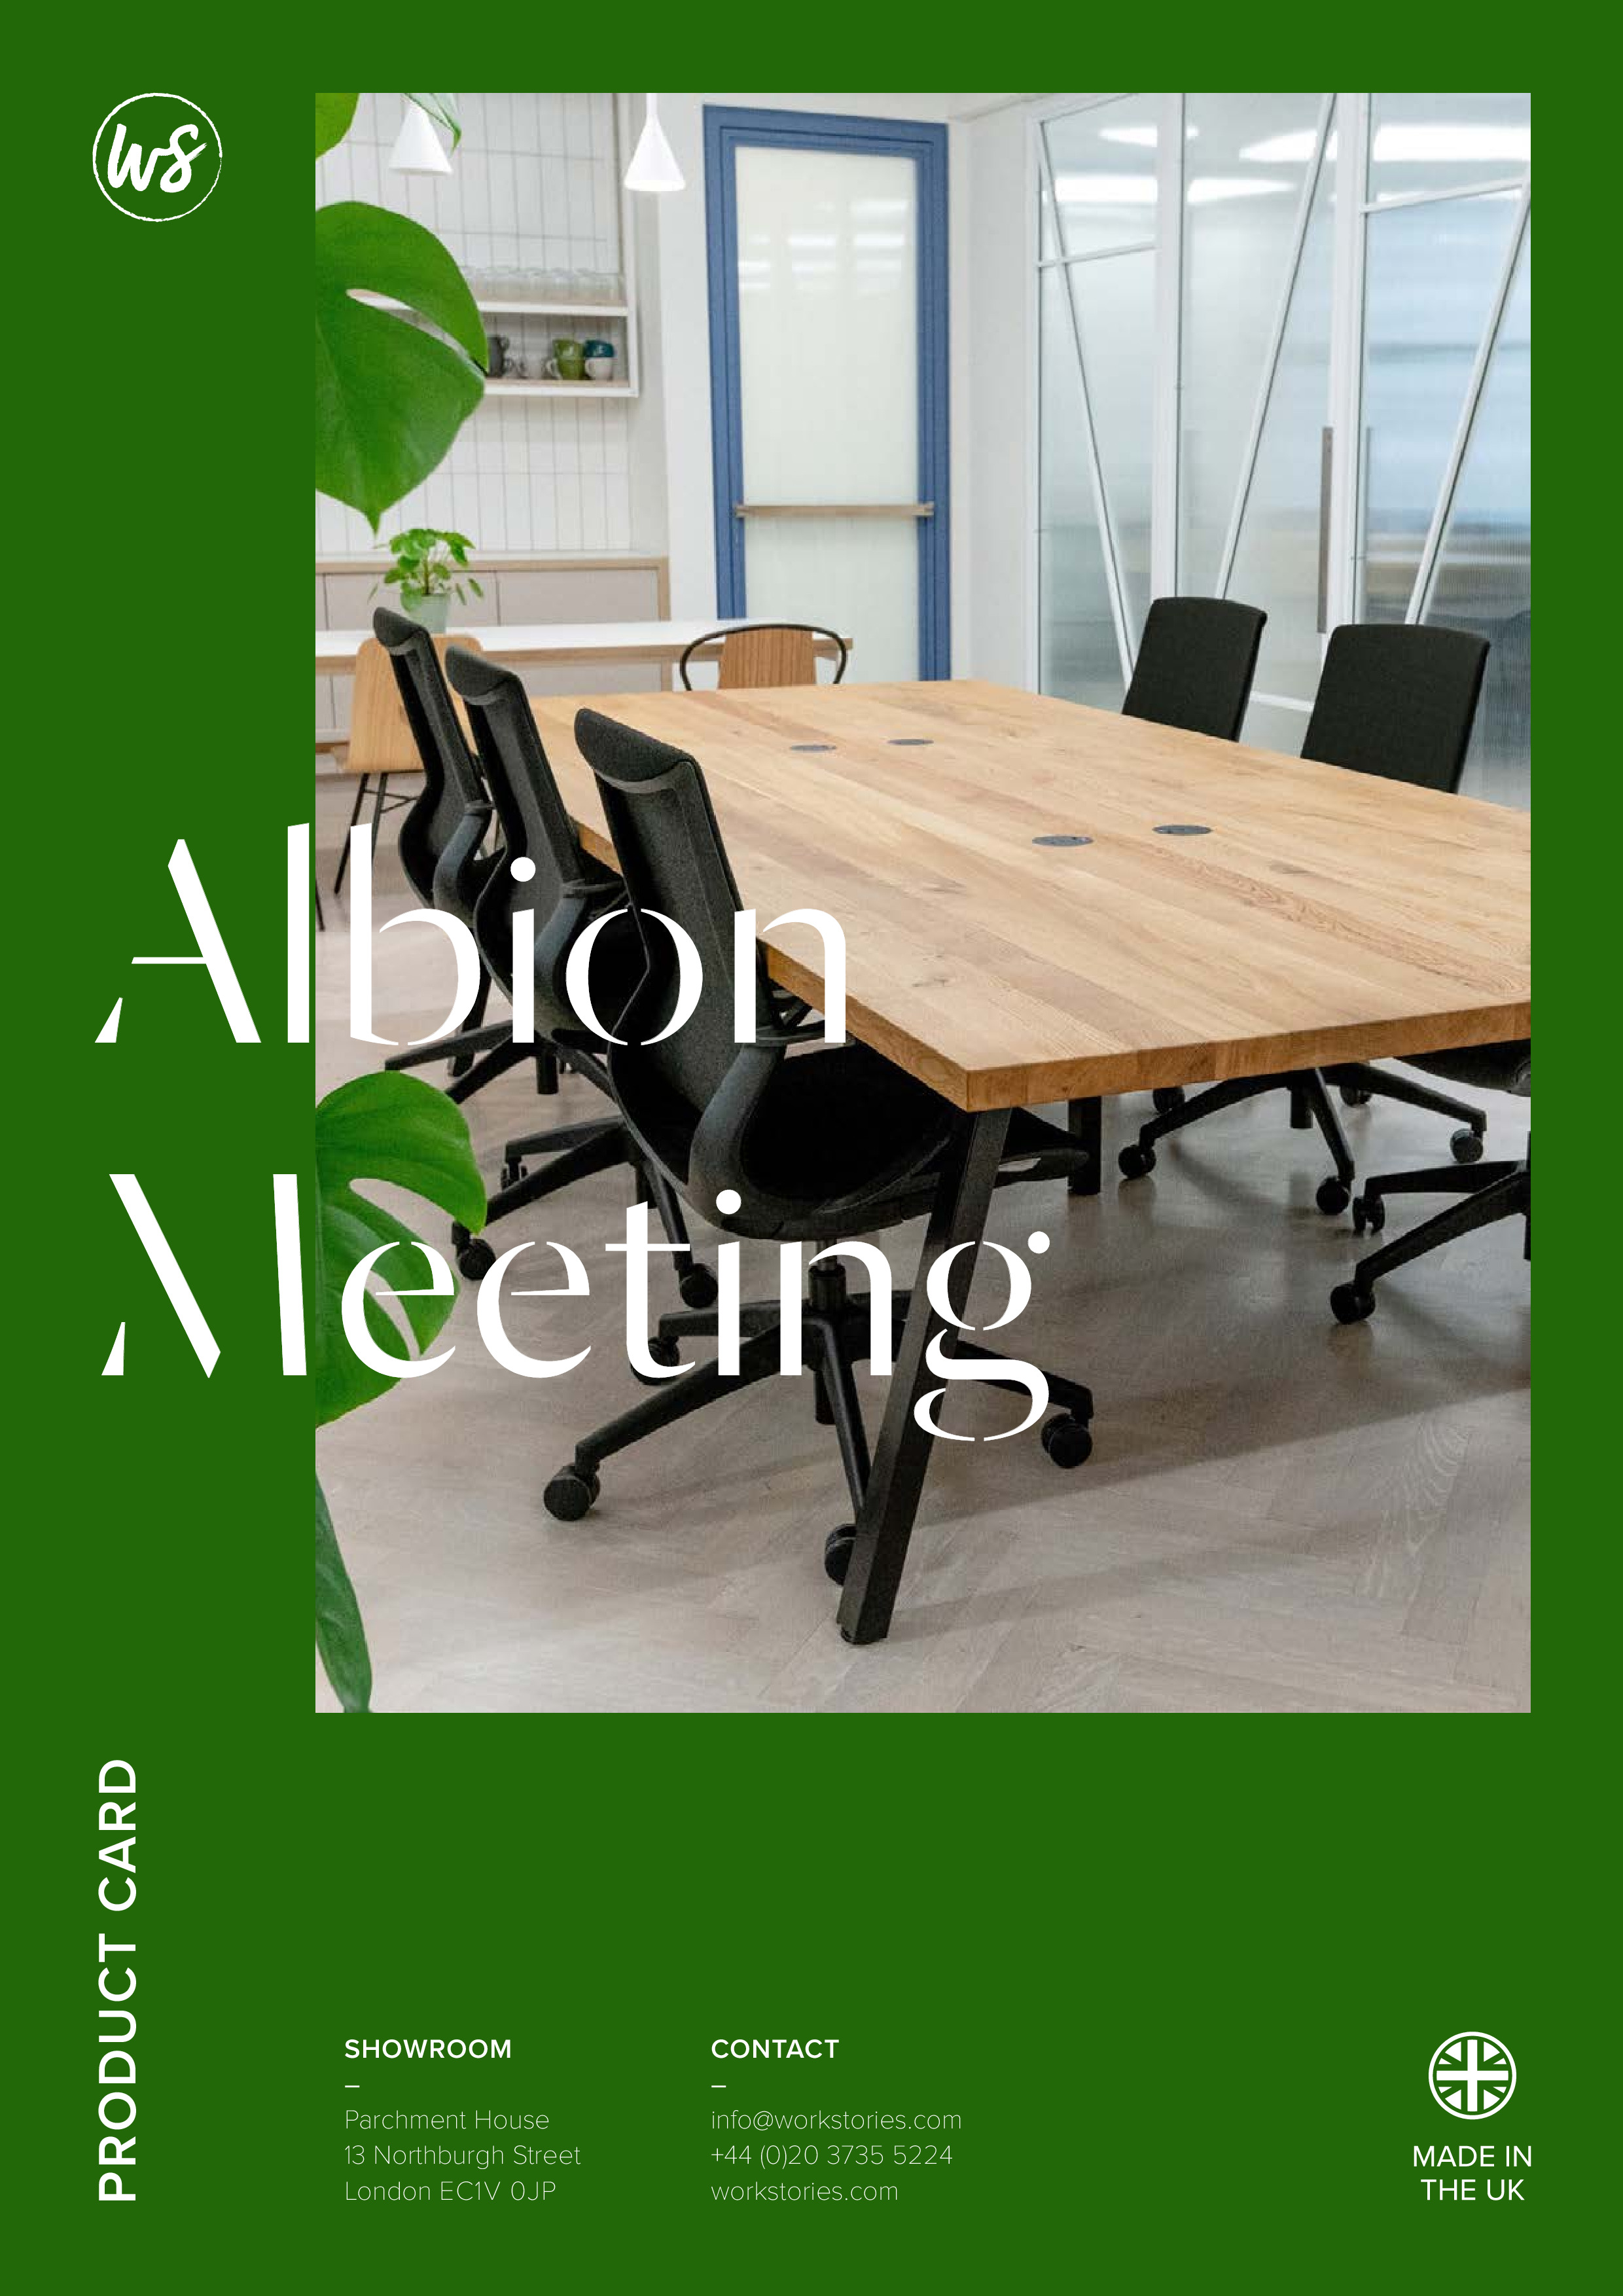 WS - Albion Meeting - Product card